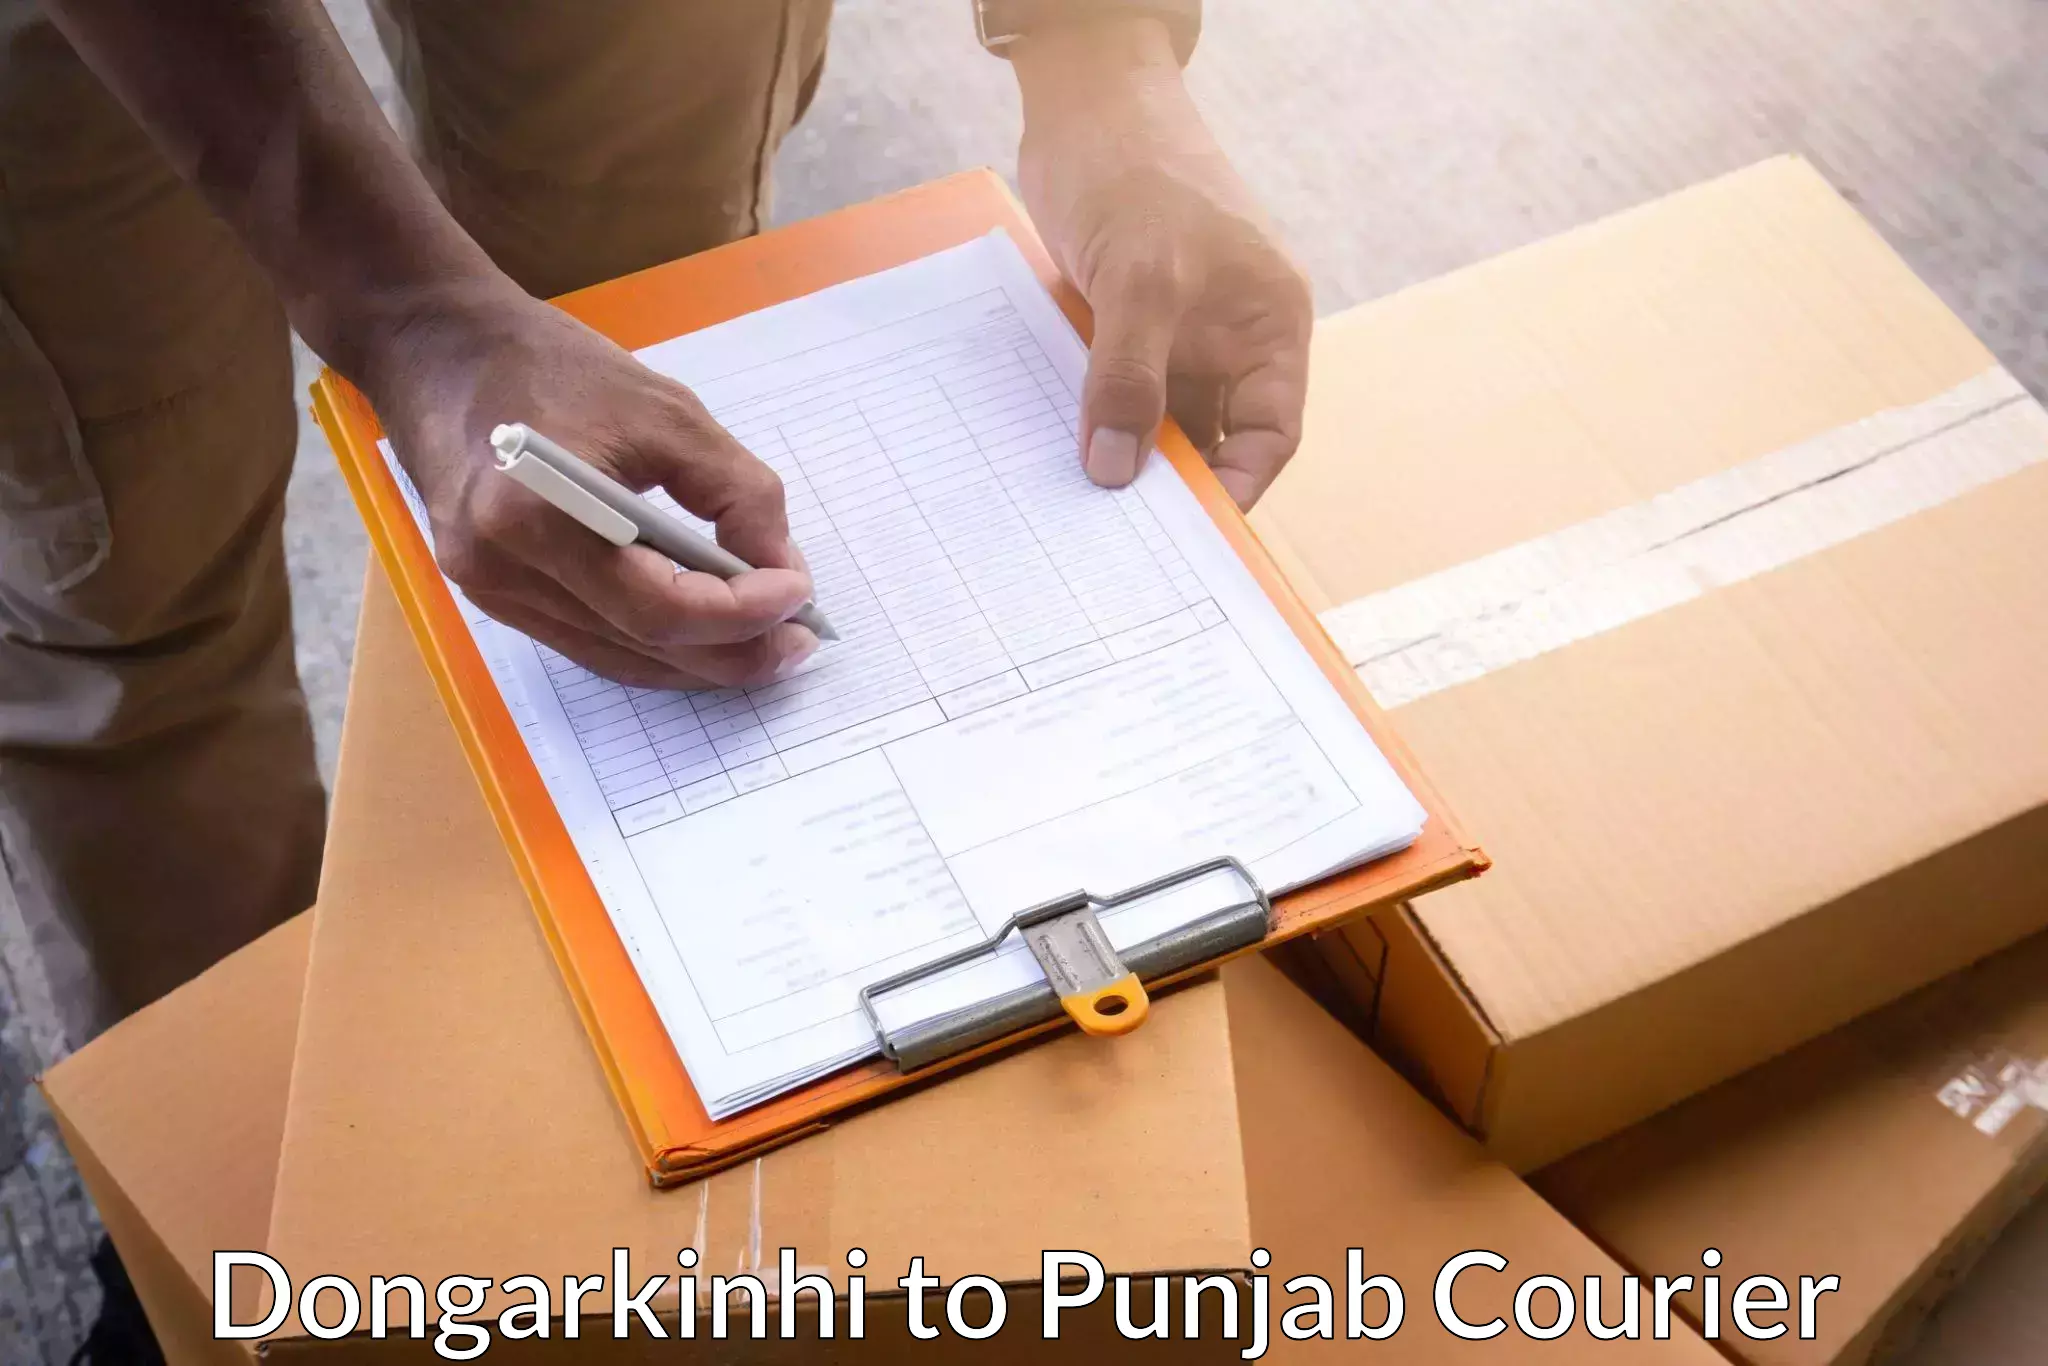 Global shipping solutions in Dongarkinhi to Punjab